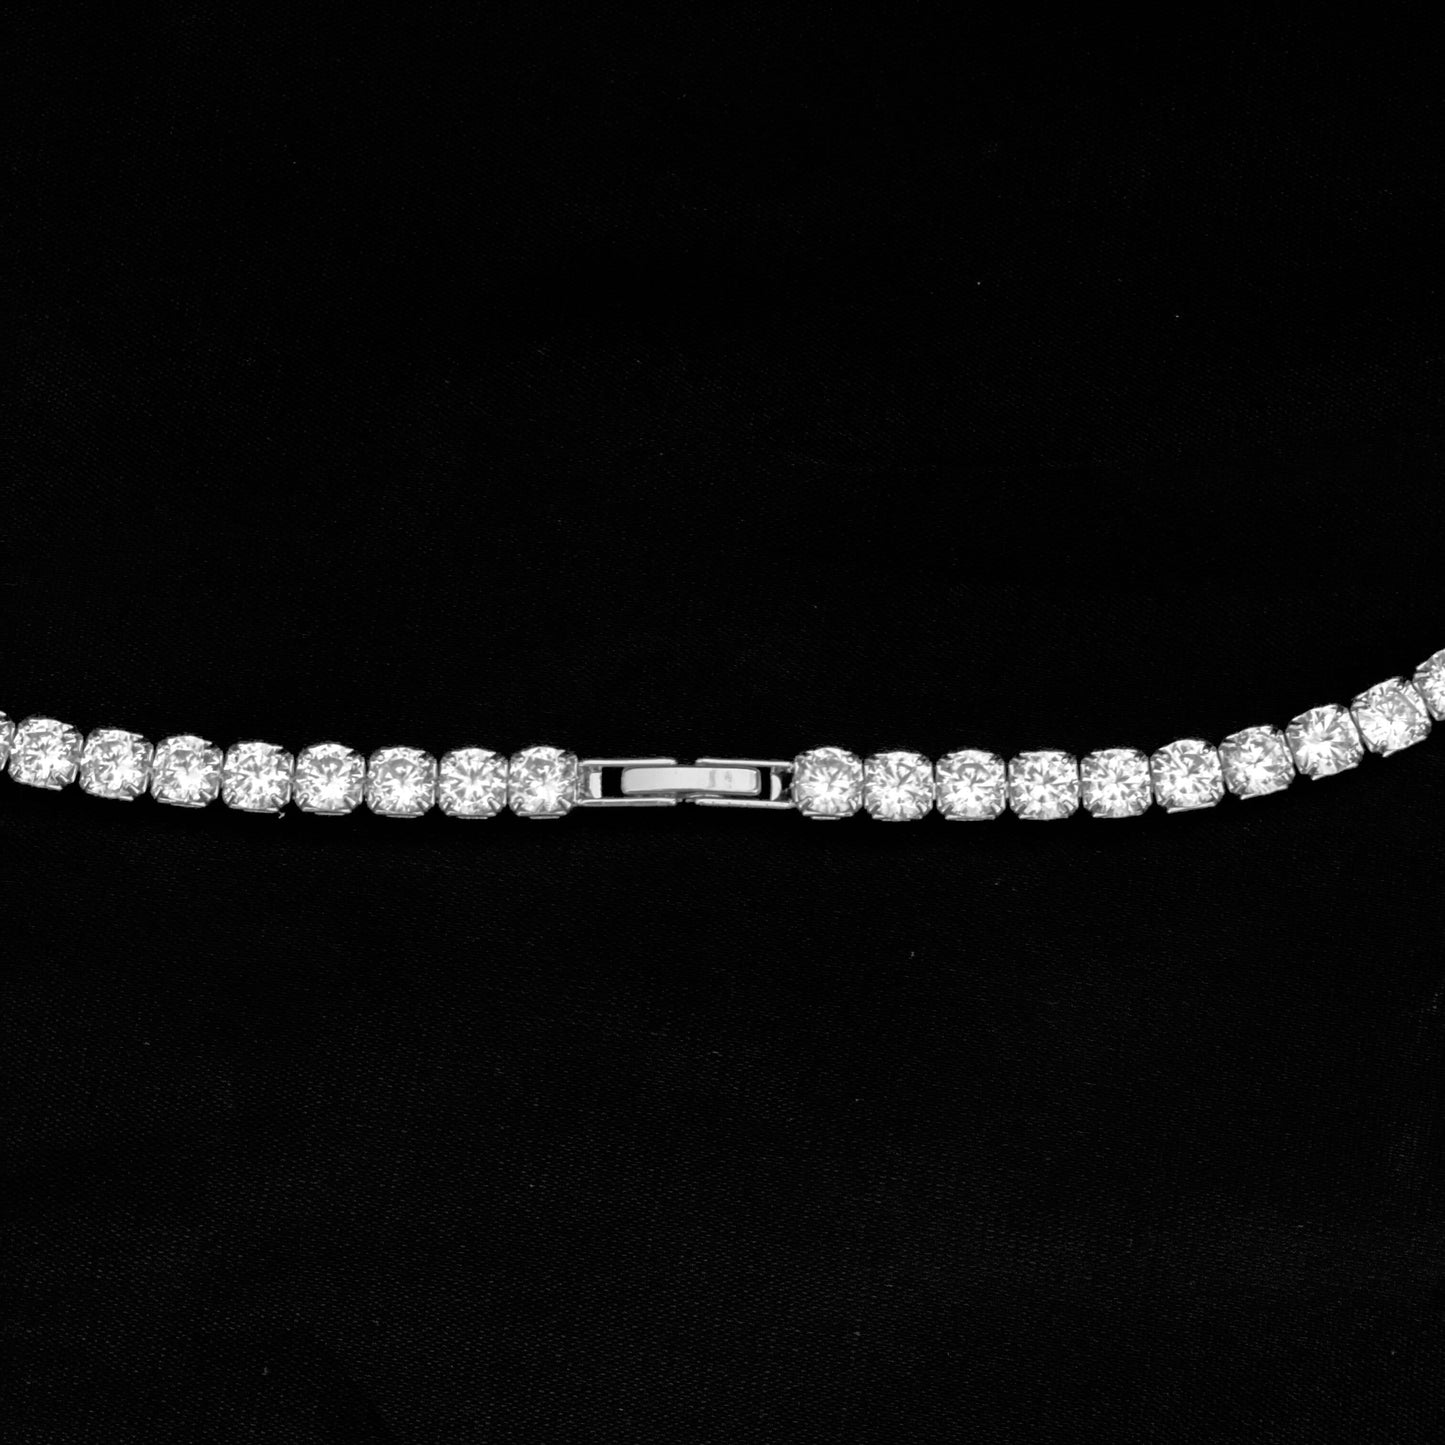 Tennis Necklace 5mm - White Gold